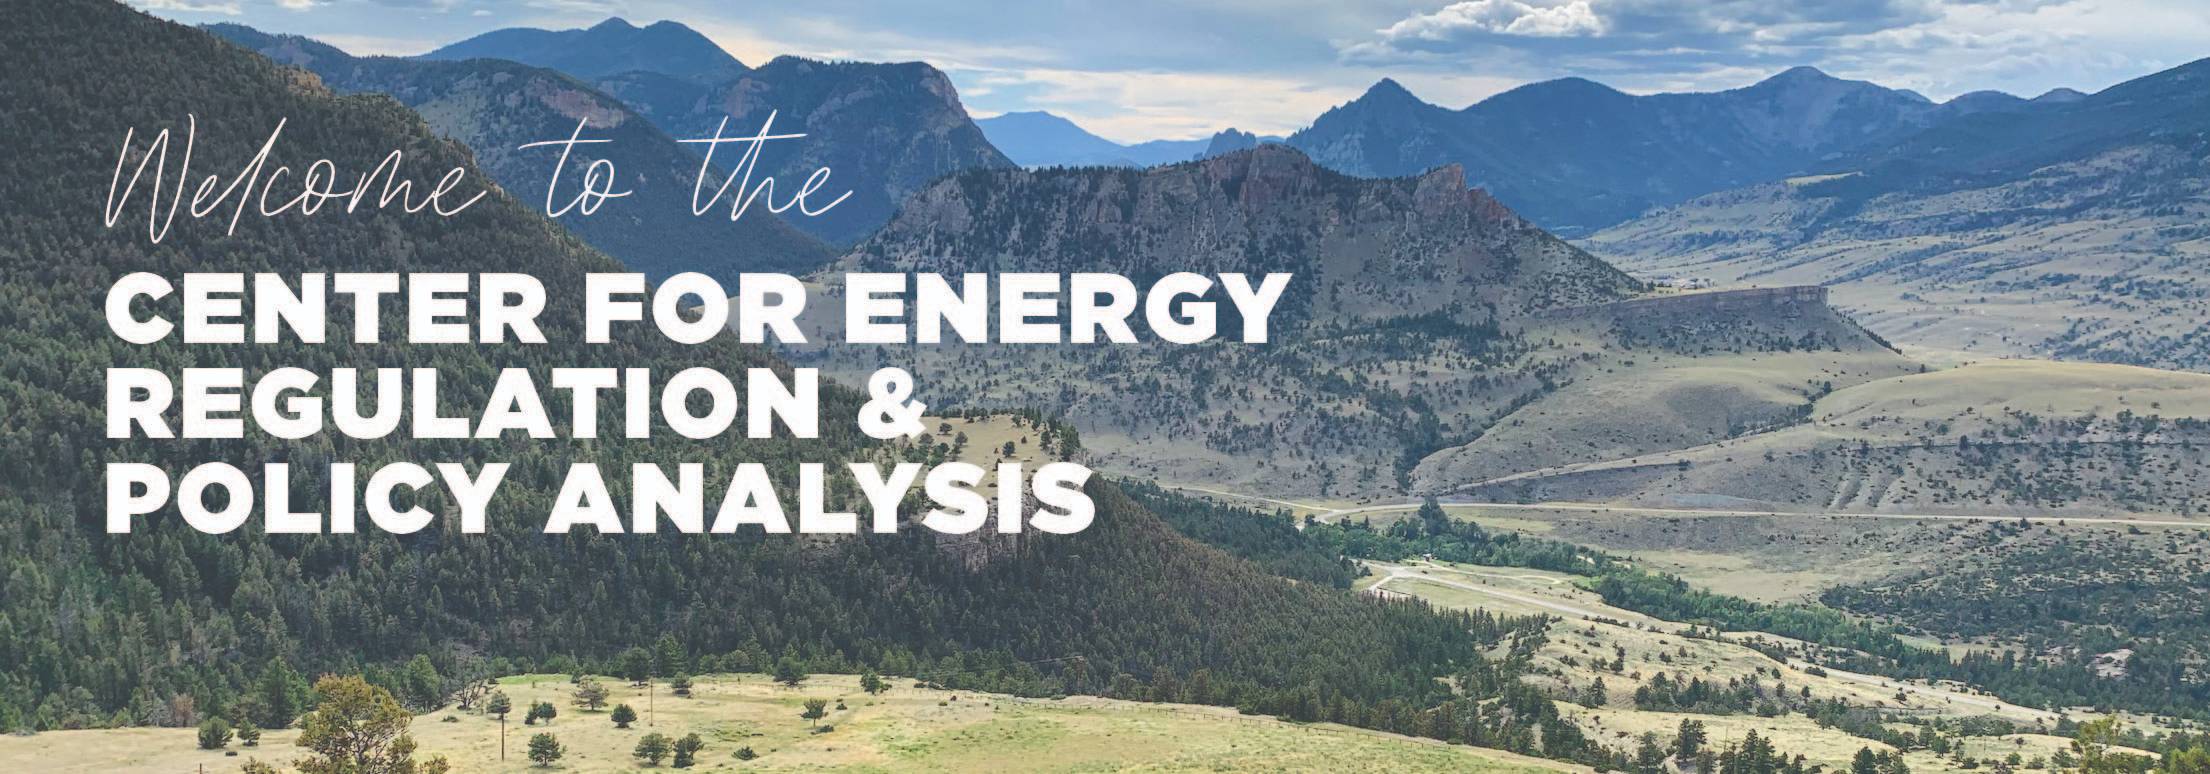 Welcome to the Center for Energy Regulation and Policy Analysis over an industrial energy site